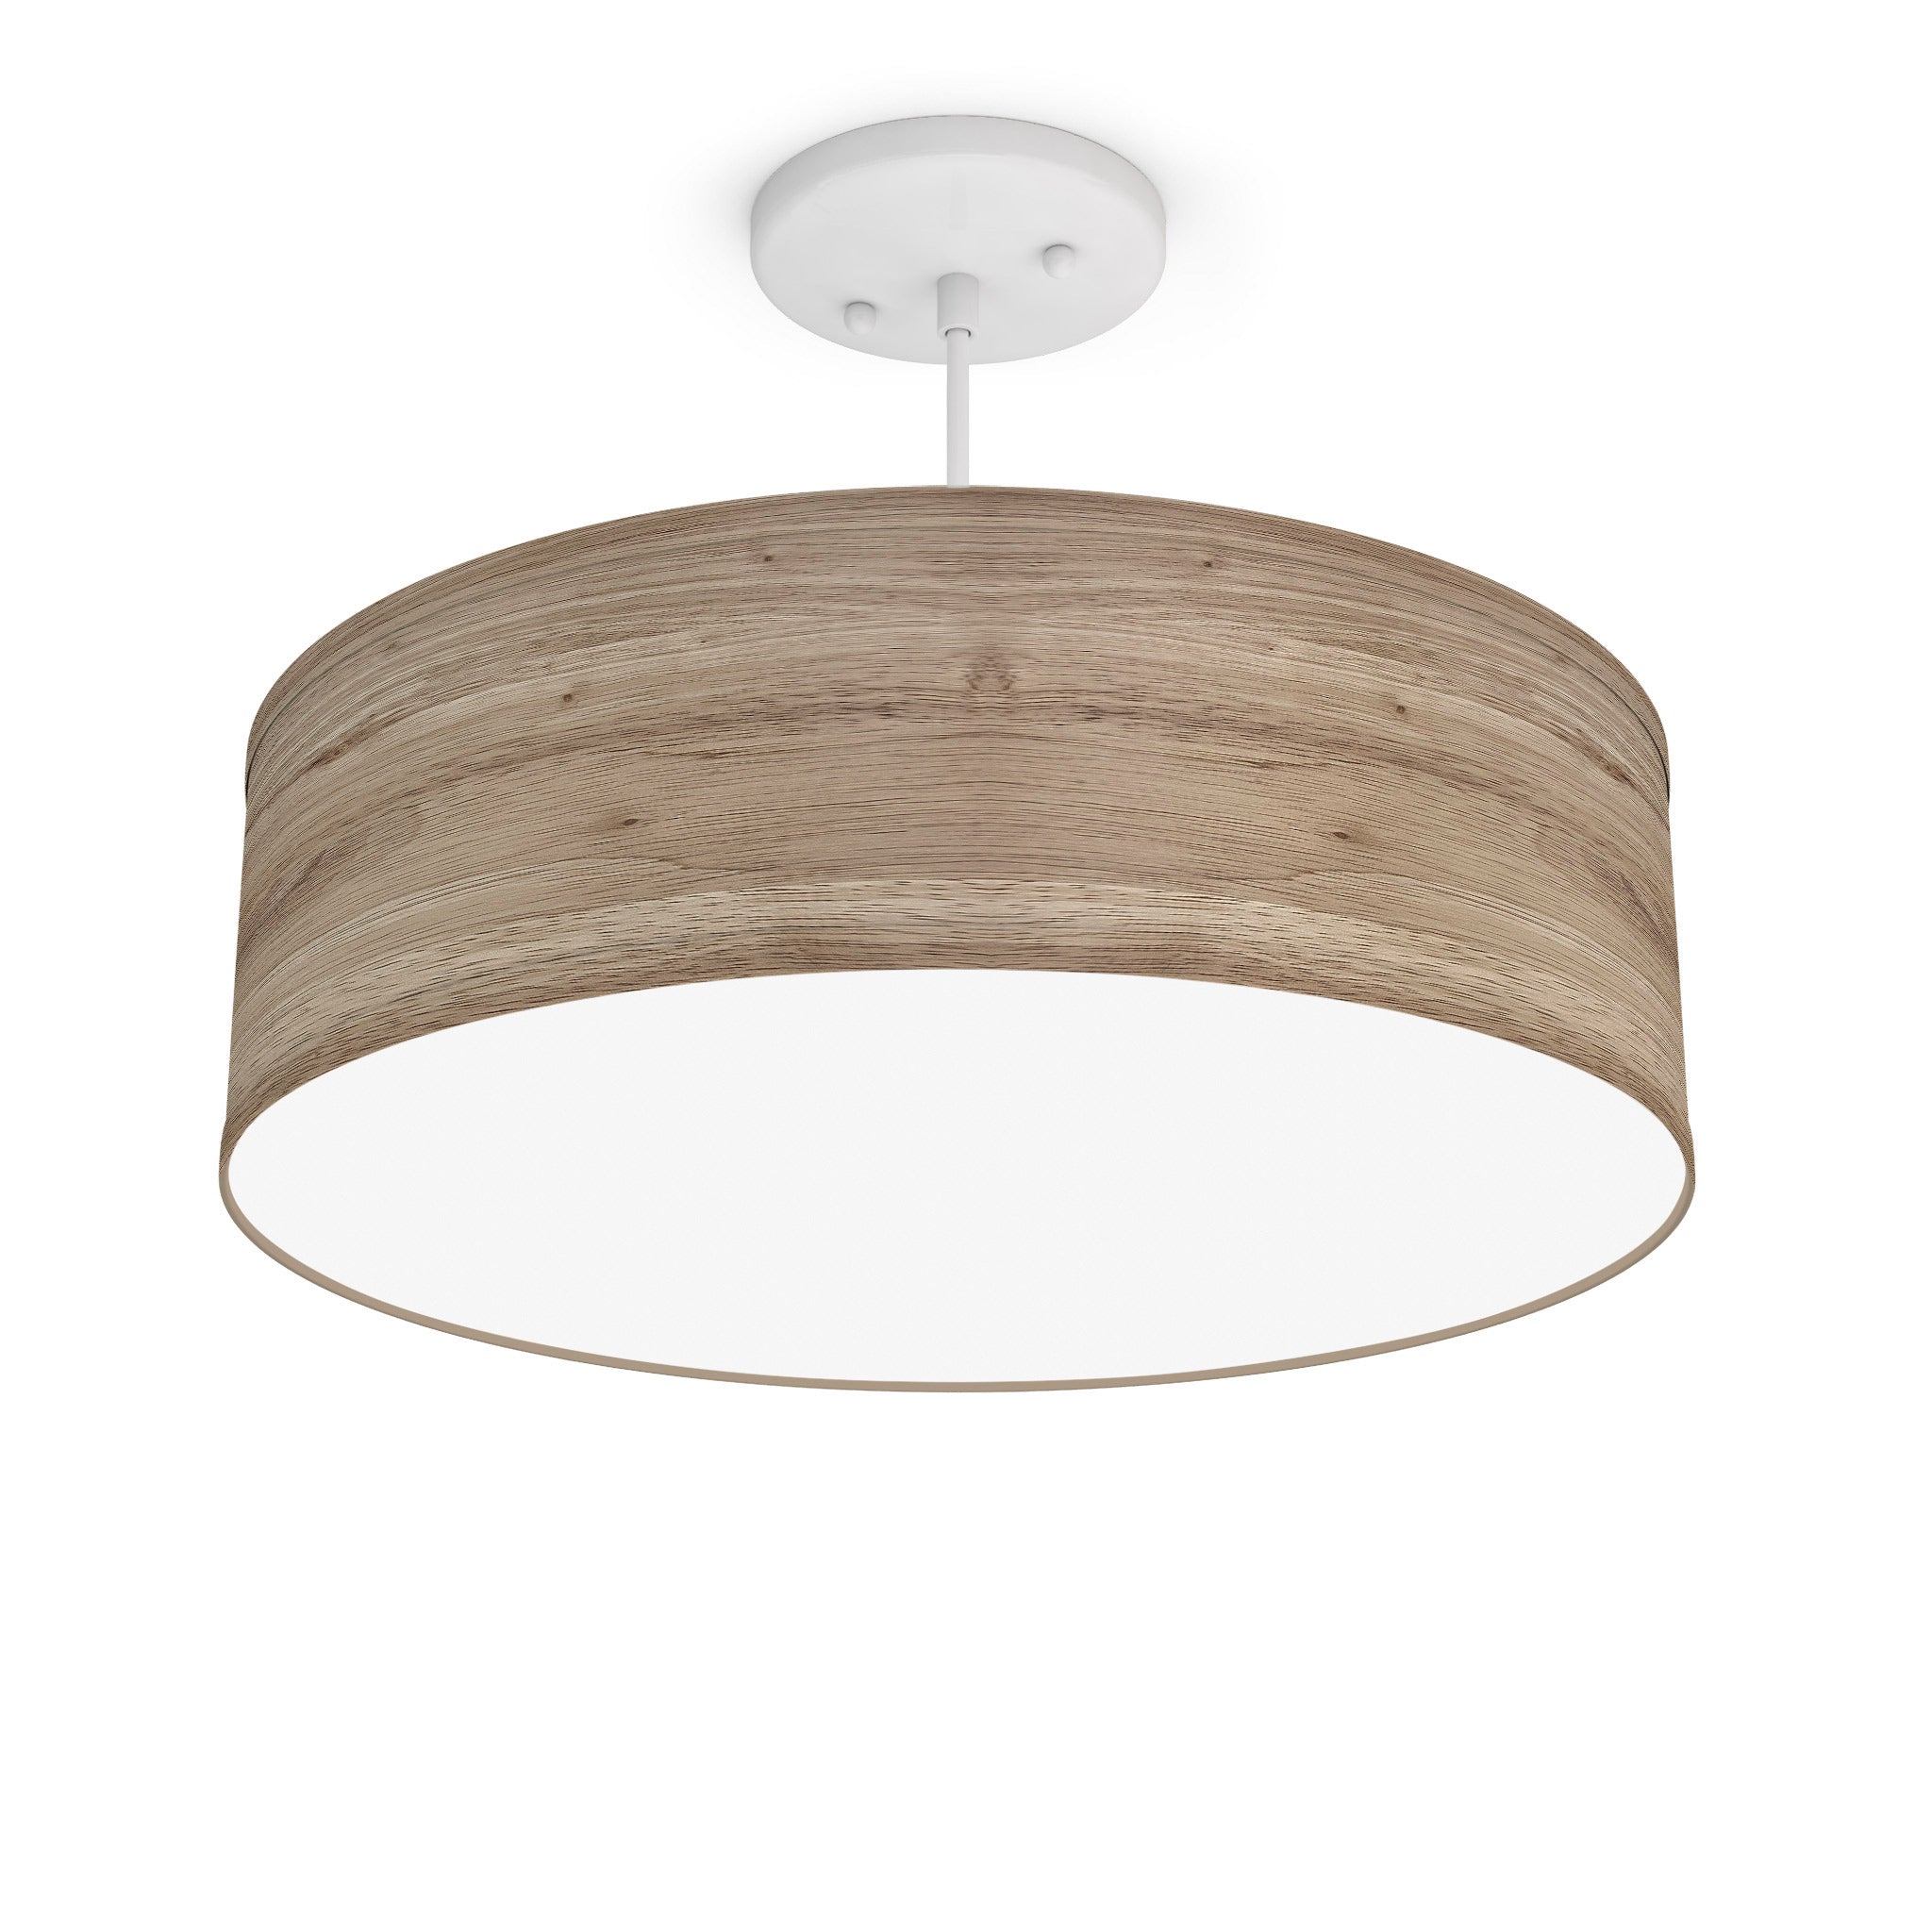 The Sheila Hanging Lamp from Seascape Fixtures with the white base in photo veneer, natural color.